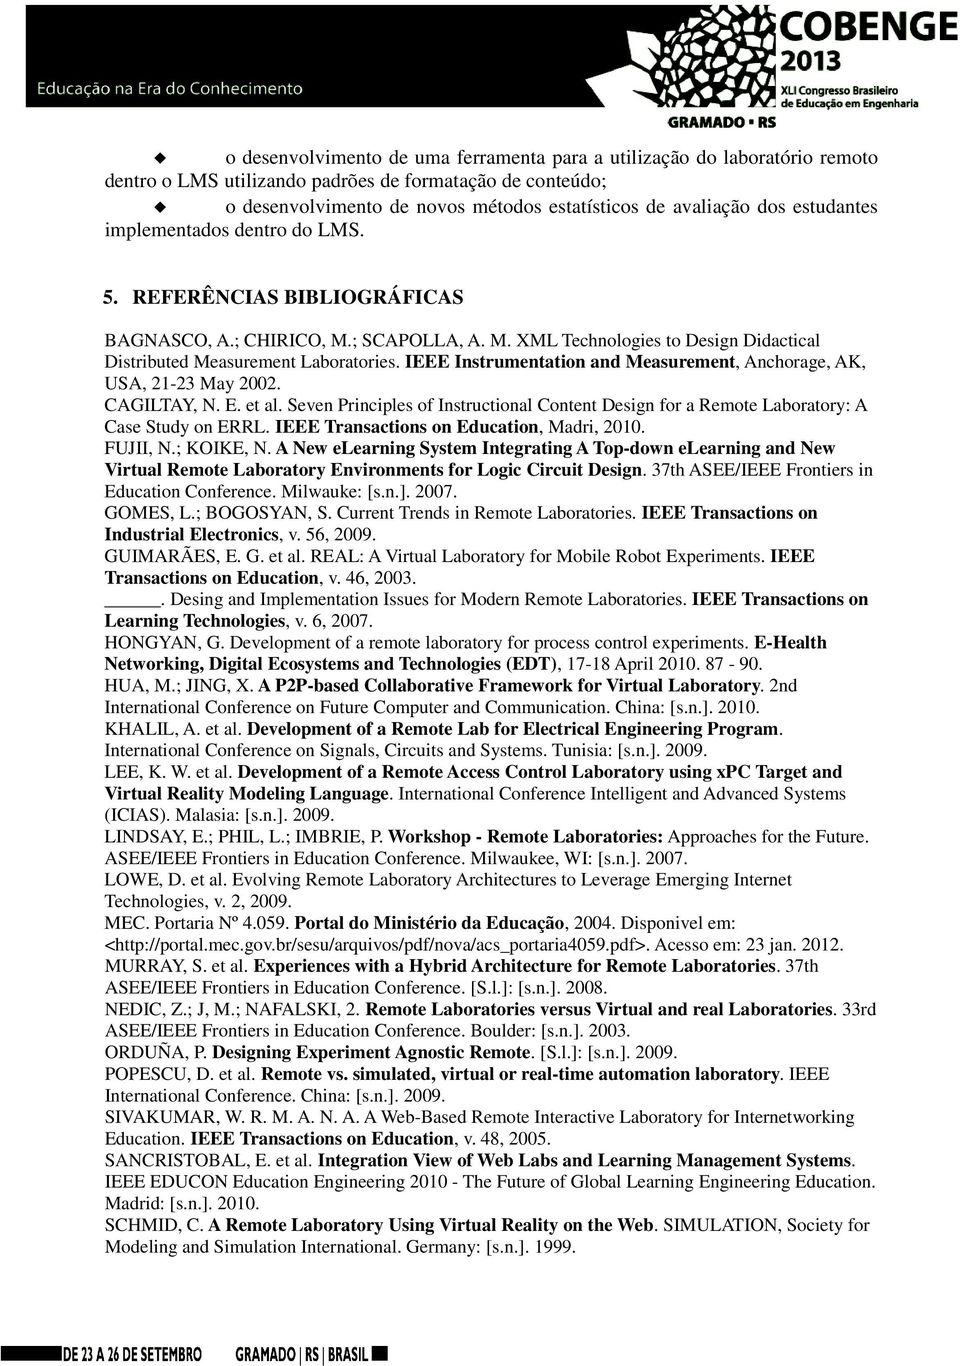 IEEE Instrumentation and Measurement, Anchorage, AK, USA, 21-23 May 2002. CAGILTAY, N. E. et al. Seven Principles of Instructional Content Design for a Remote Laboratory: A Case Study on ERRL.